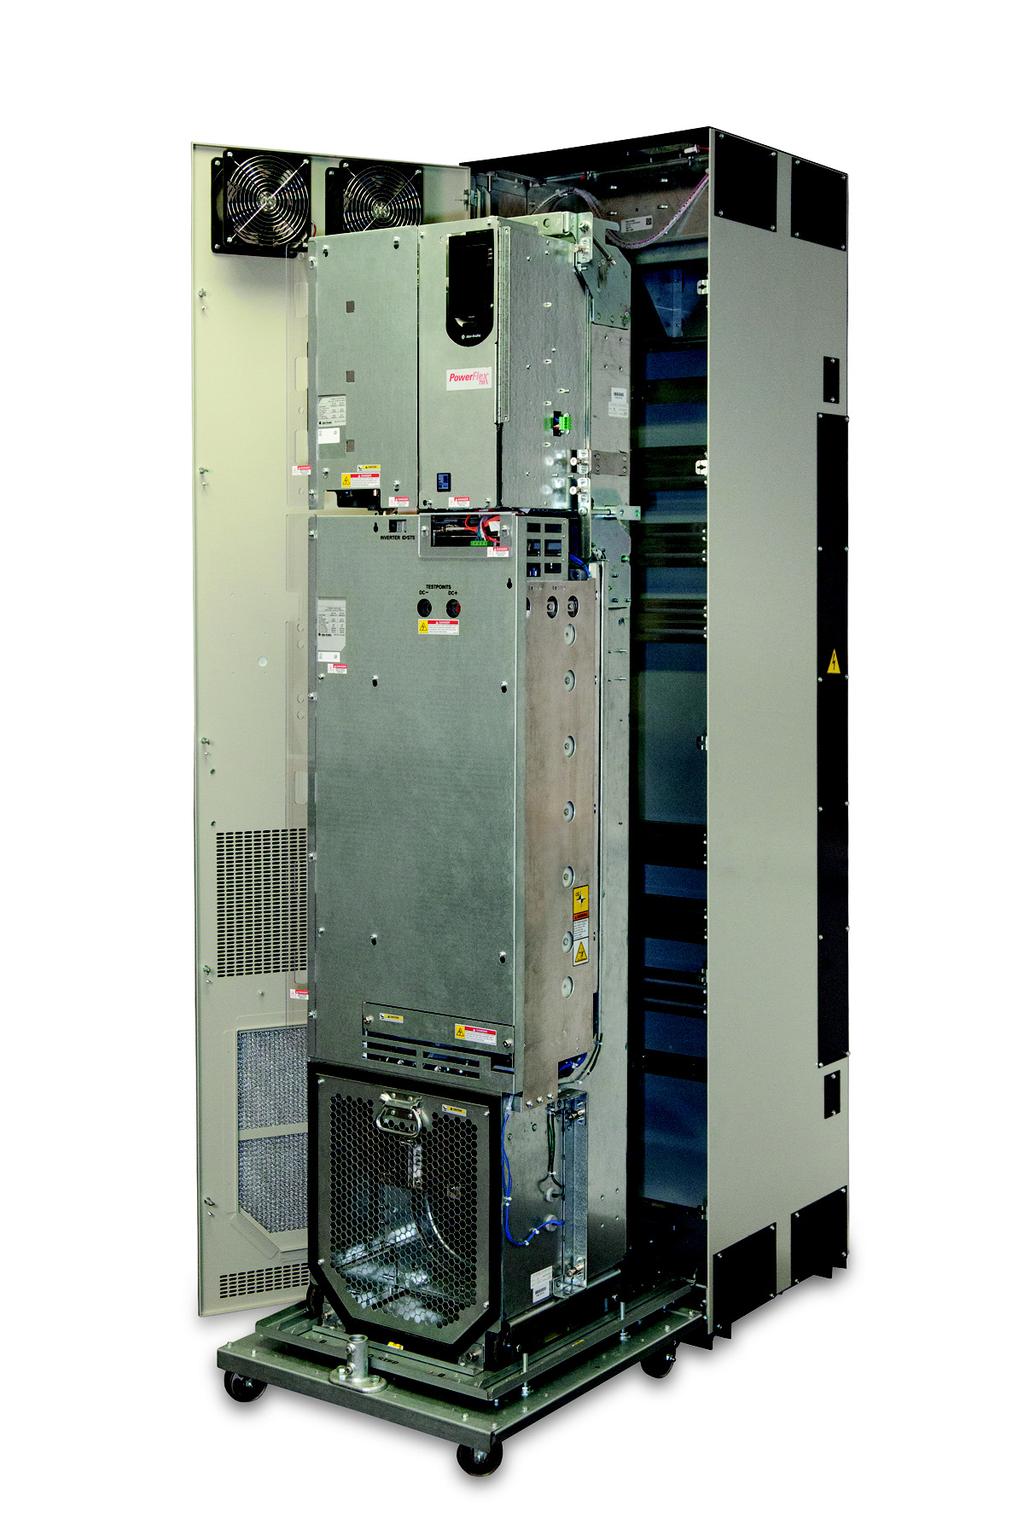 A roll-out cart is required for Frames 8 drives and Frame 9 option bay chassis.